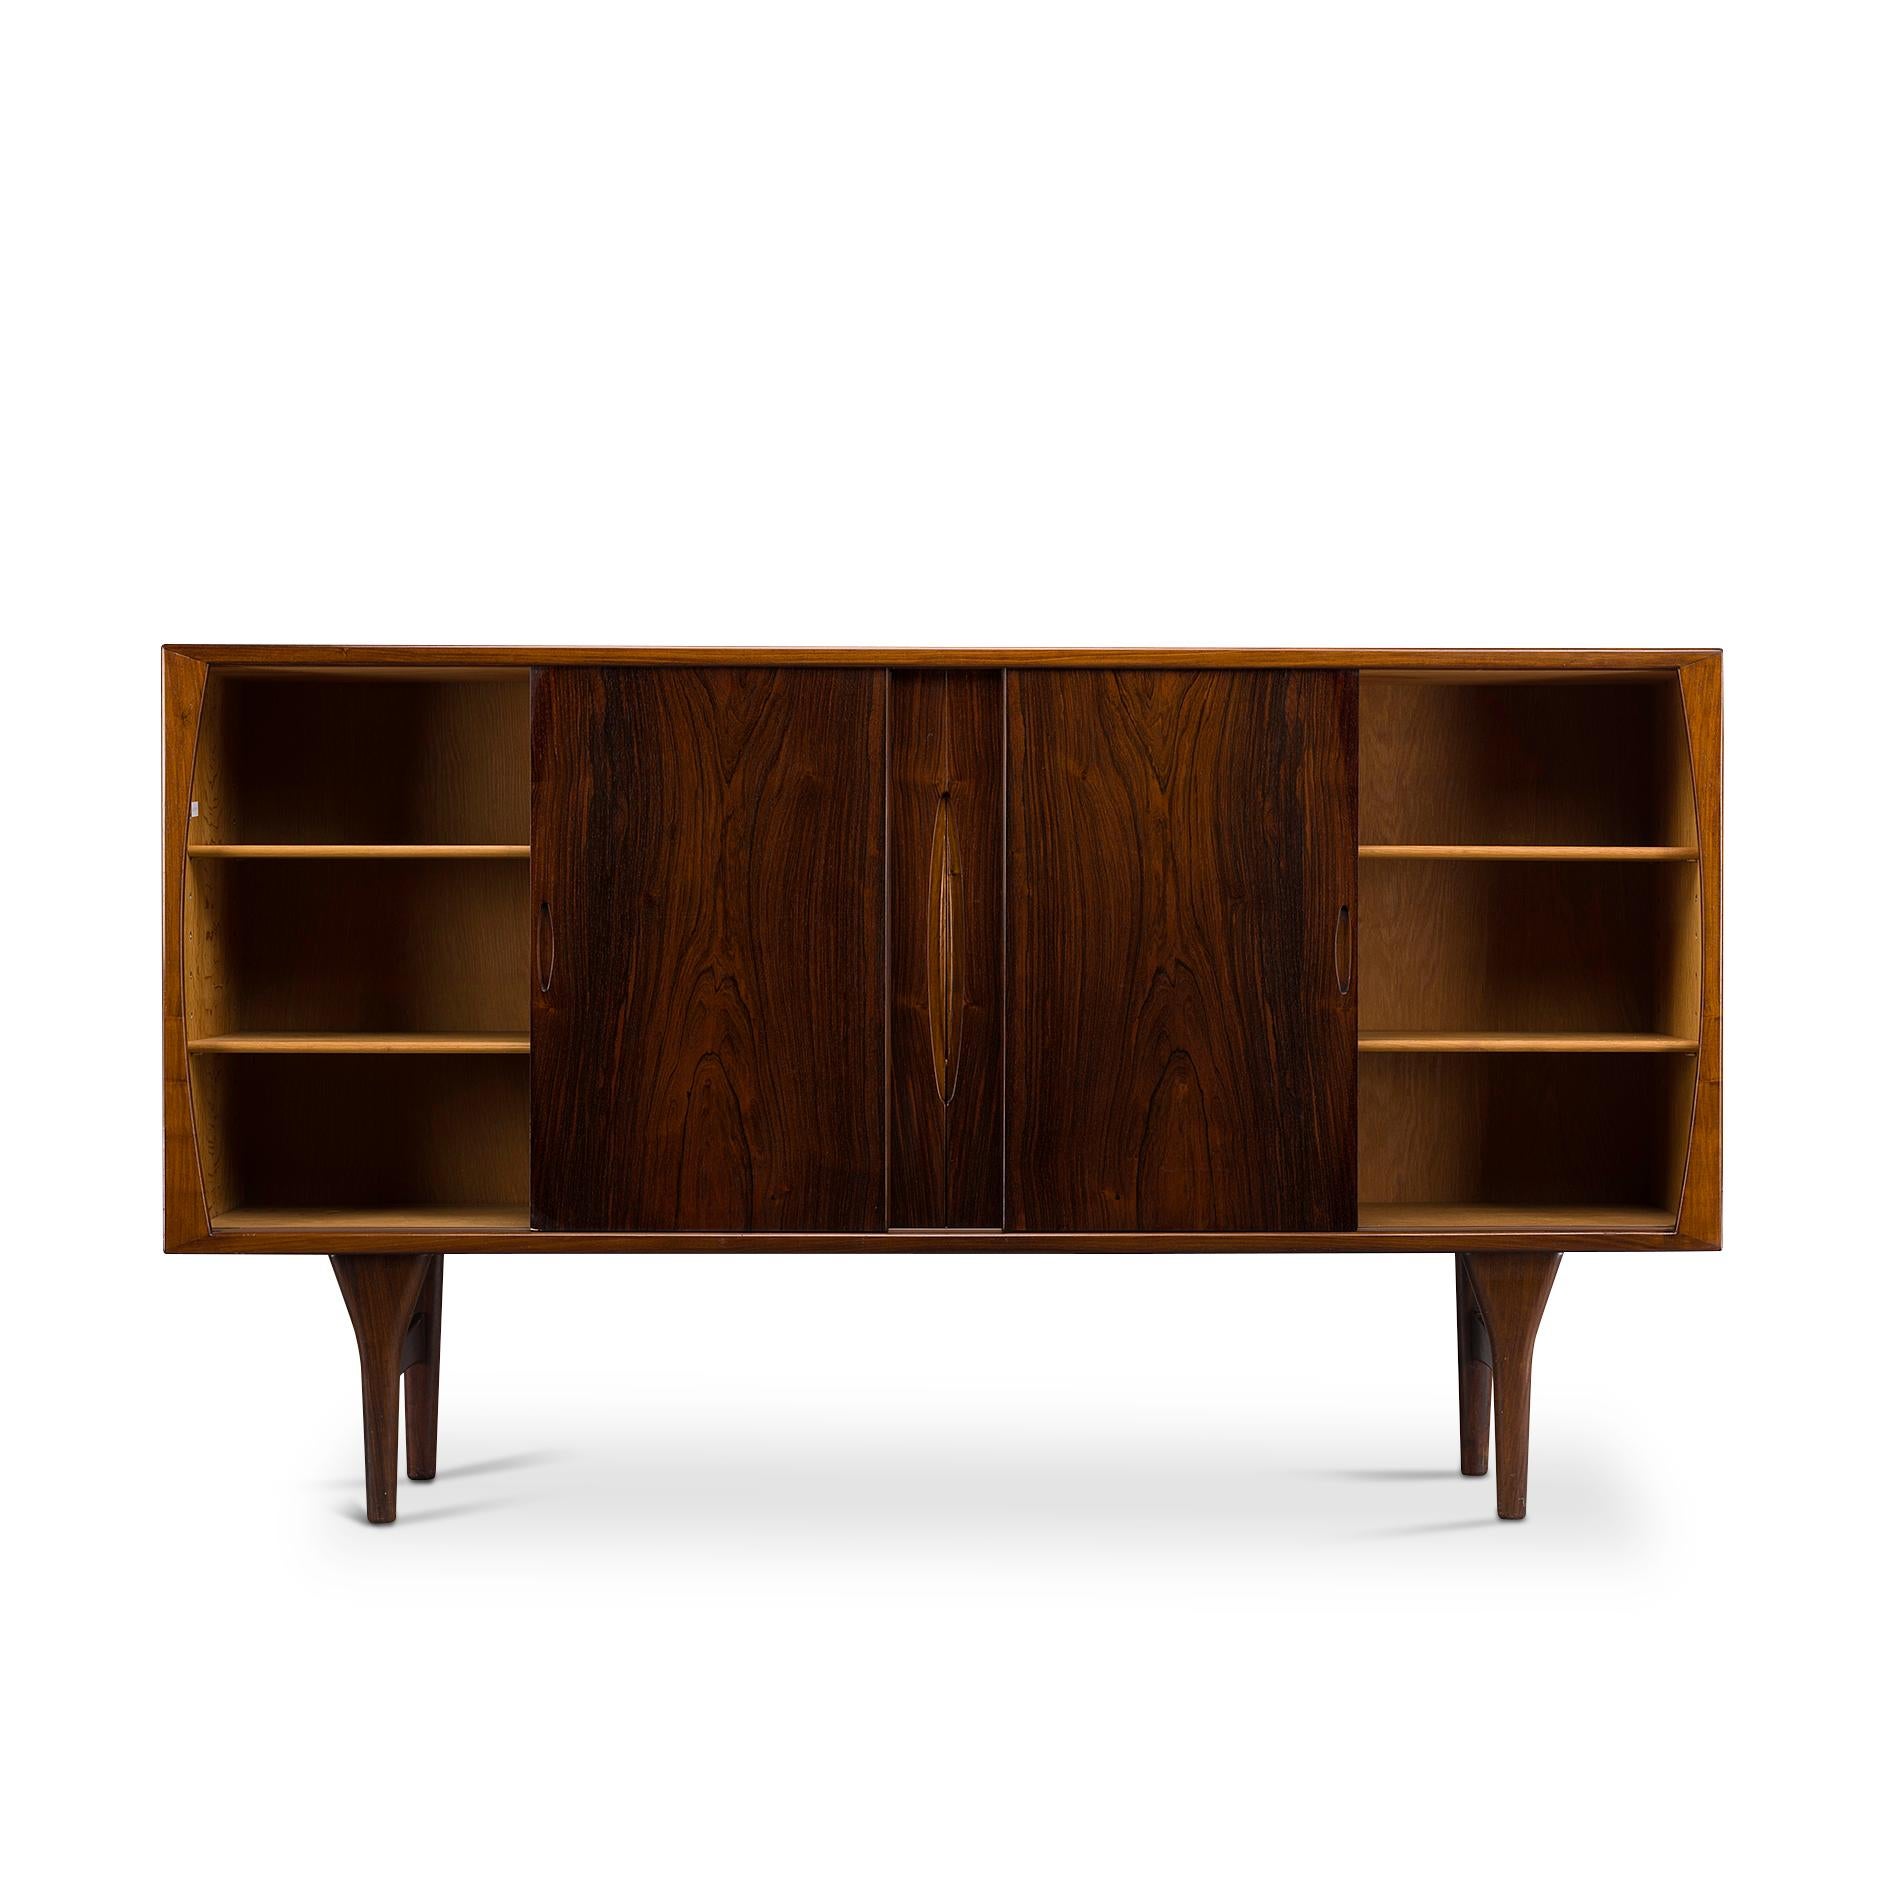 This Danish Mid-Century Modern credenza is a top-quality unit by Henning Kjaernulf for Bruno Hansen. Perfection in shape by subtle and well thought through detail. Like the solid wooden bezel, the carved grips in the sliding doors and the selection